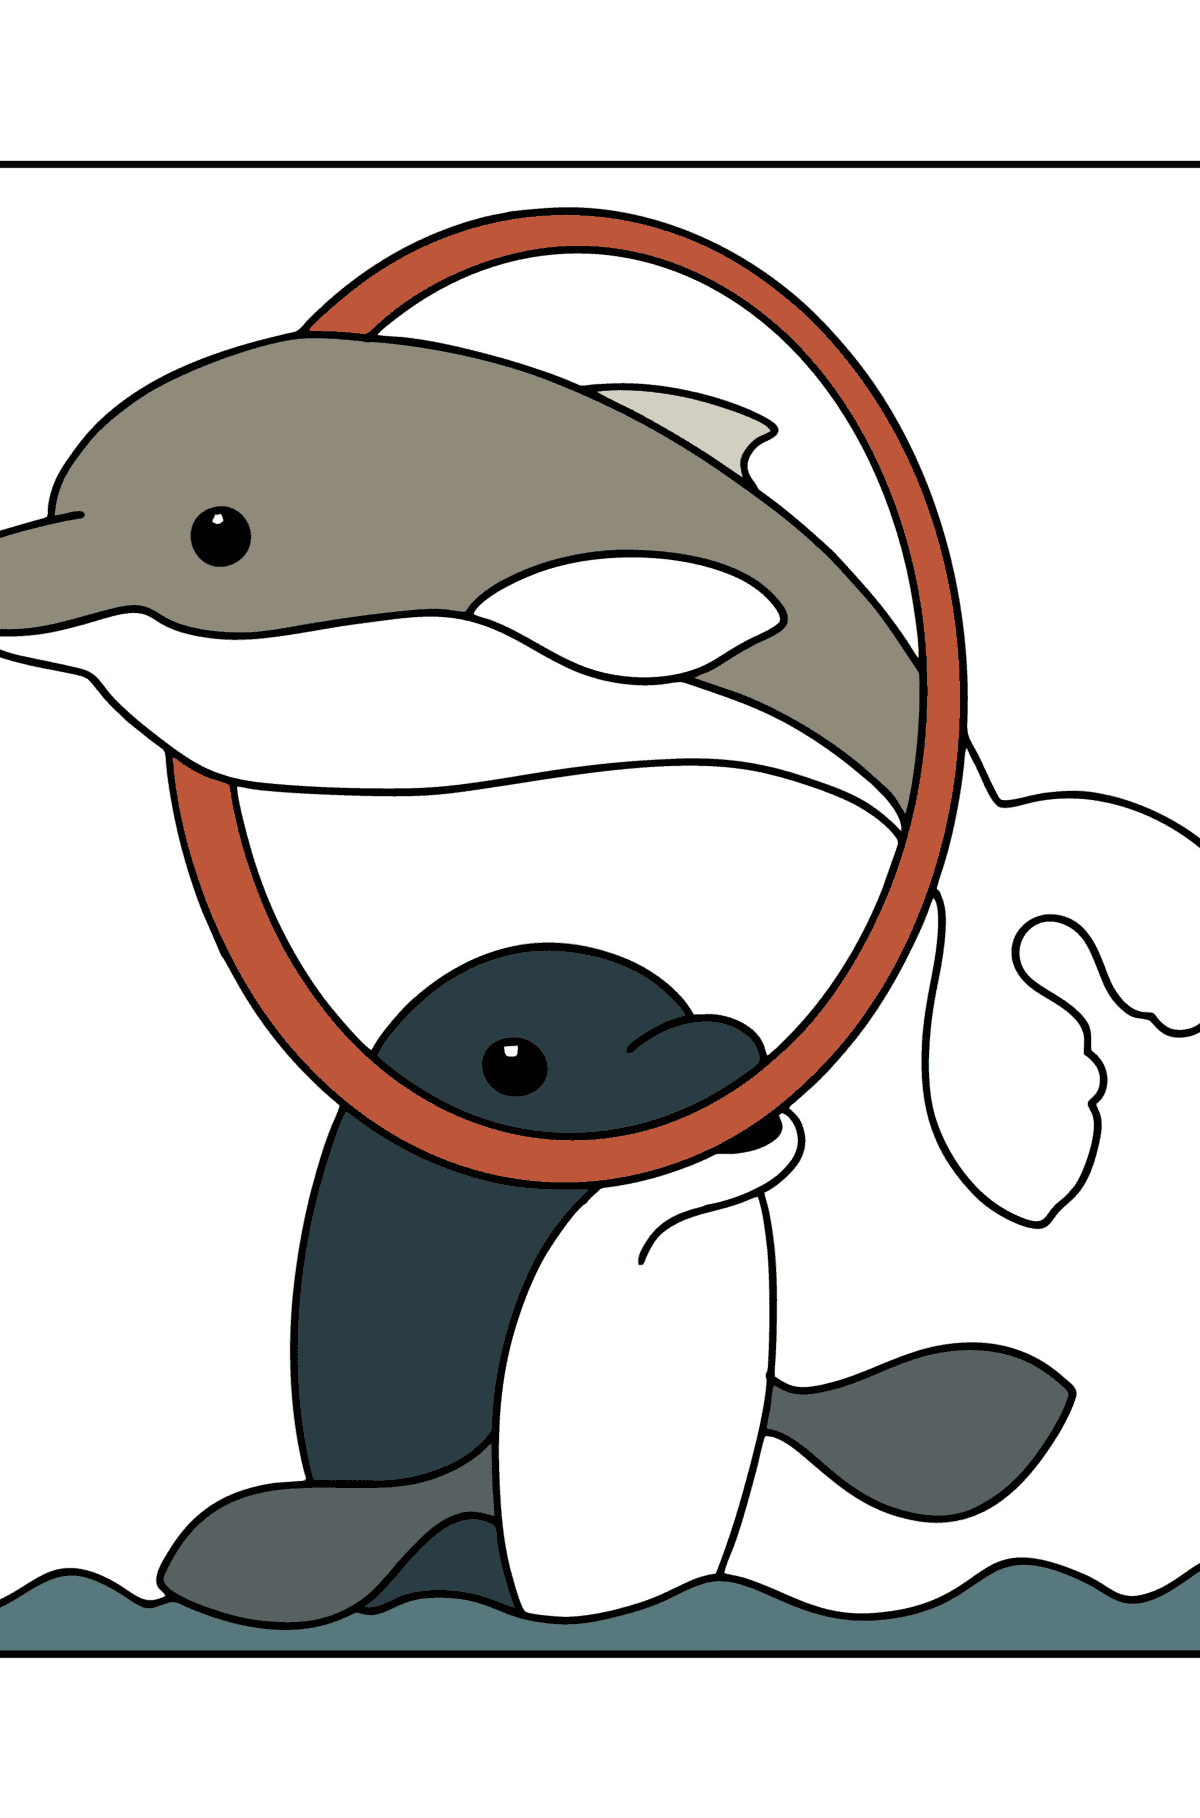 Dolphins in Water coloring page - Coloring Pages for Kids